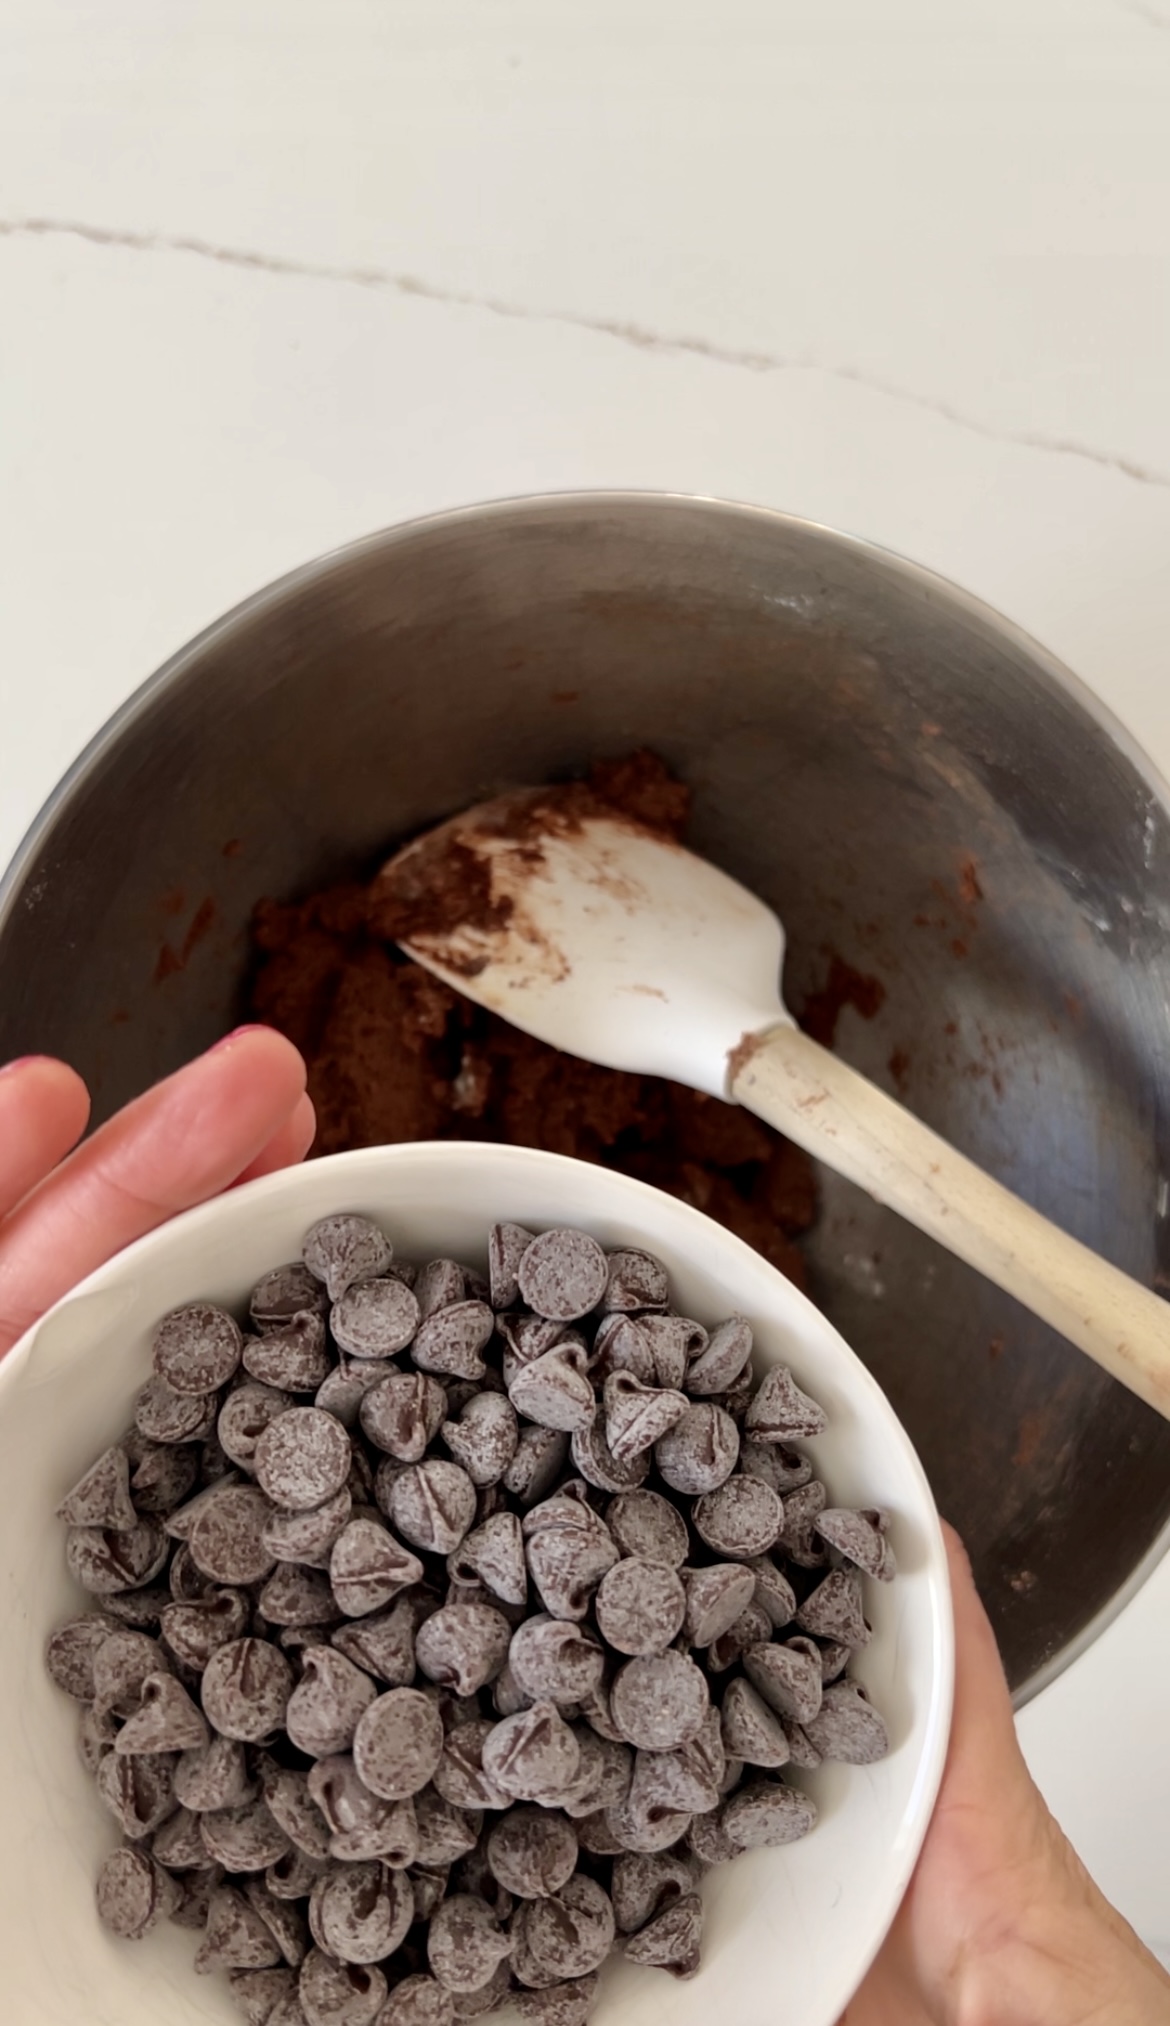 Double chocolate vegan cookies, topped with chocolate chips, served in a bowl with a spoon.